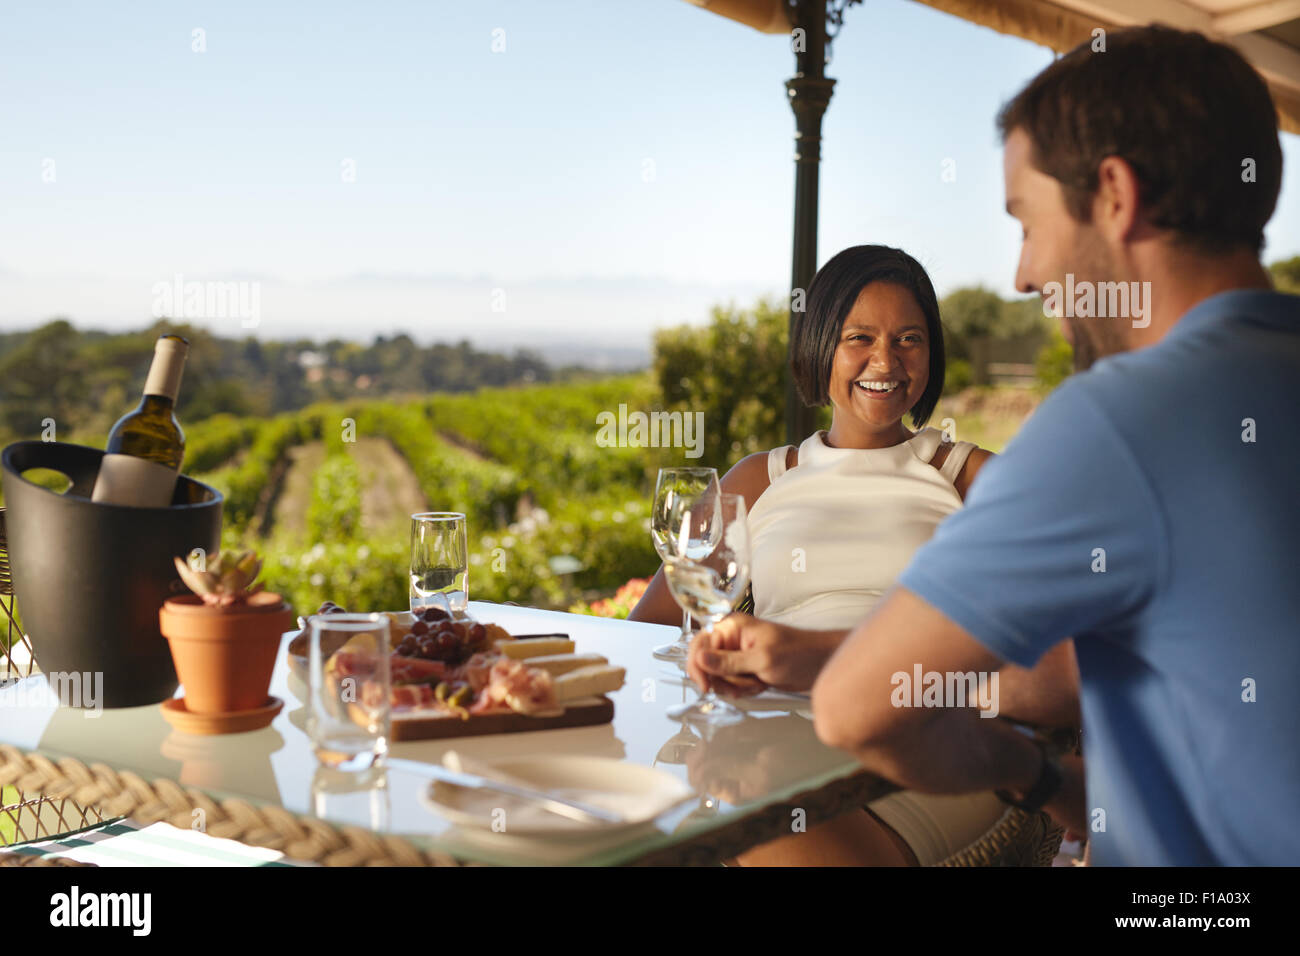 Happy young couple at winery restaurant with vineyard in background. Smiling young woman with a man sitting at table drinking wi Stock Photo